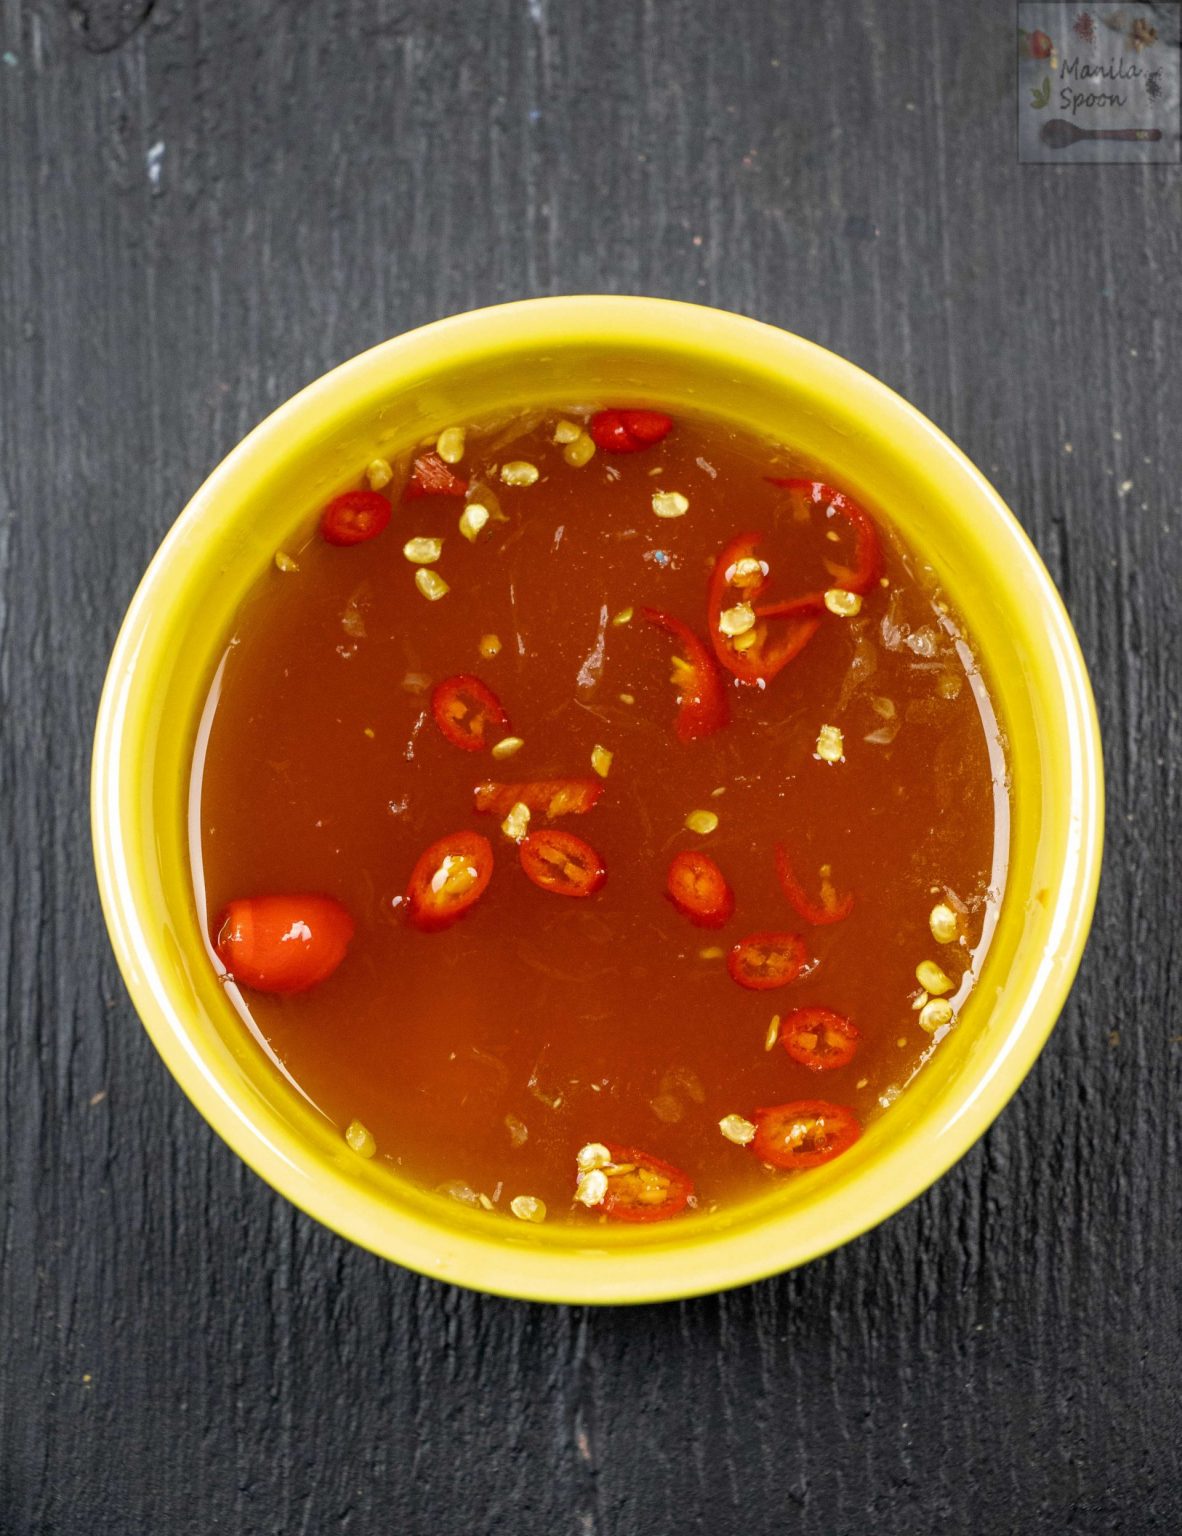 How to Make Vietnamese Dipping Sauce (Nuoc Cham) - Manila Spoon